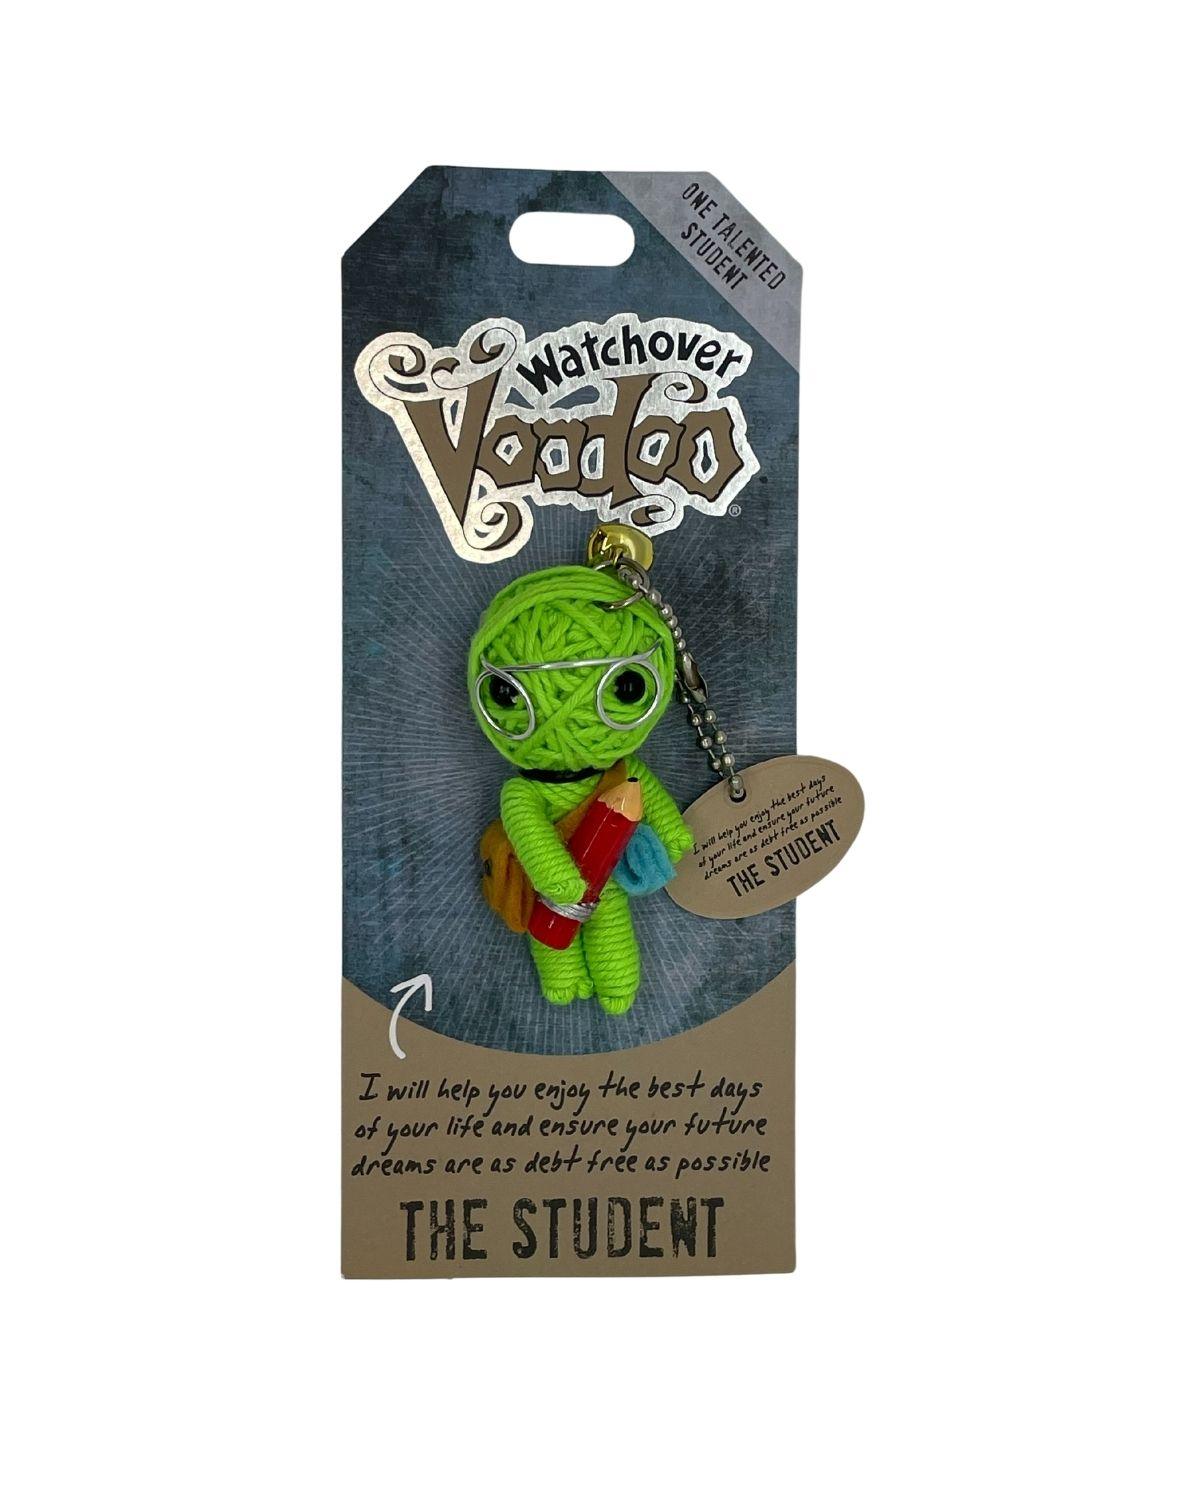 Watchover Voodoo Doll - The Student - Watchover Voodoo - String Doll